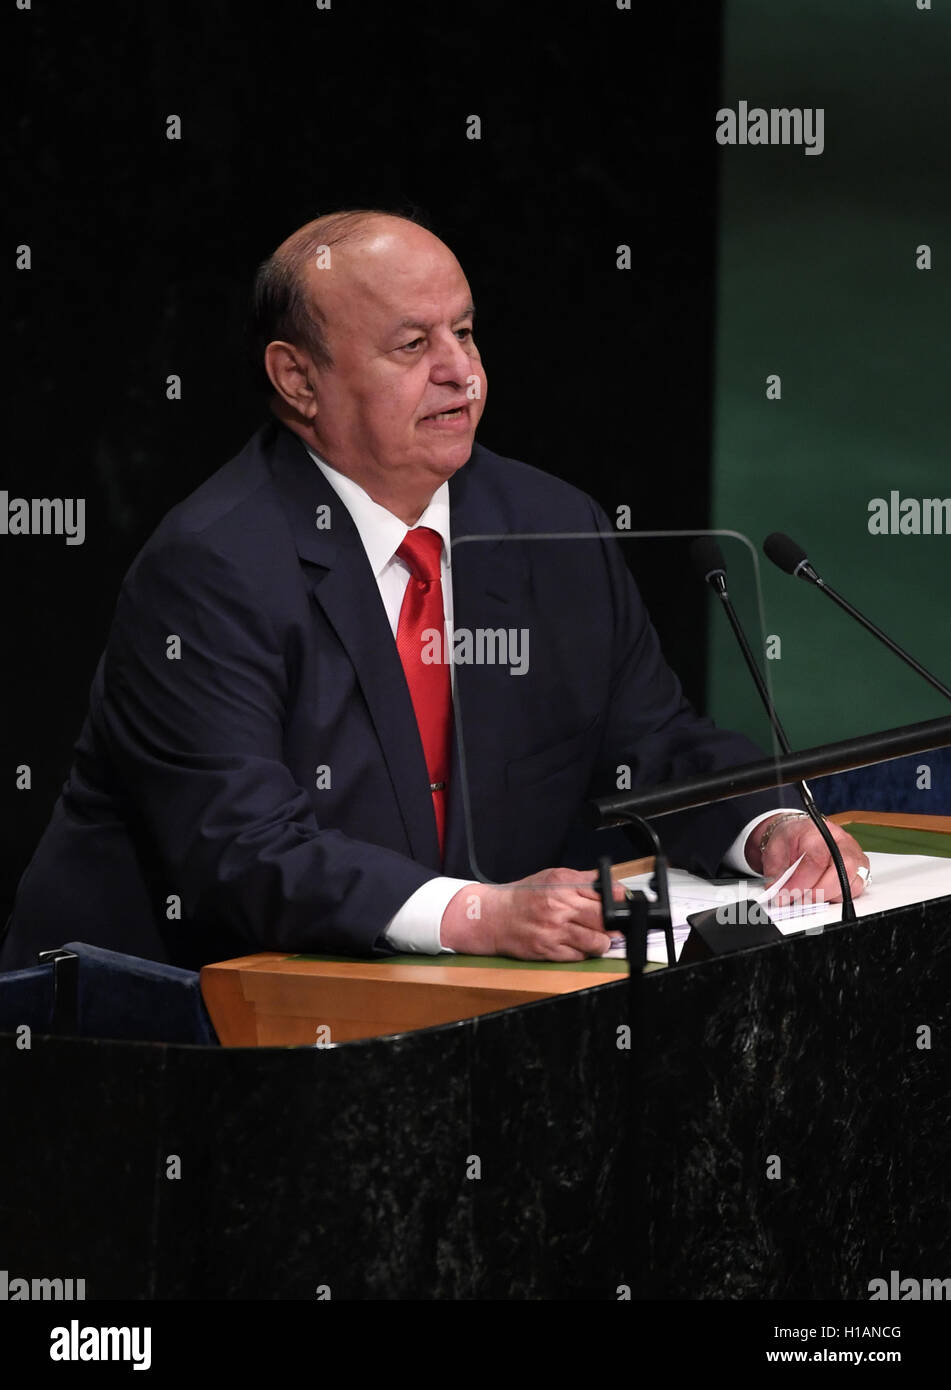 United Nations. 23rd Sep, 2016. Yemeni President Abd-Rabbu Mansour Hadi addresses the 71st session of United Nations General Assembly during the general debate at the UN headquarters in New York, Sept. 23, 2016. © Yin Bogu/Xinhua/Alamy Live News Stock Photo